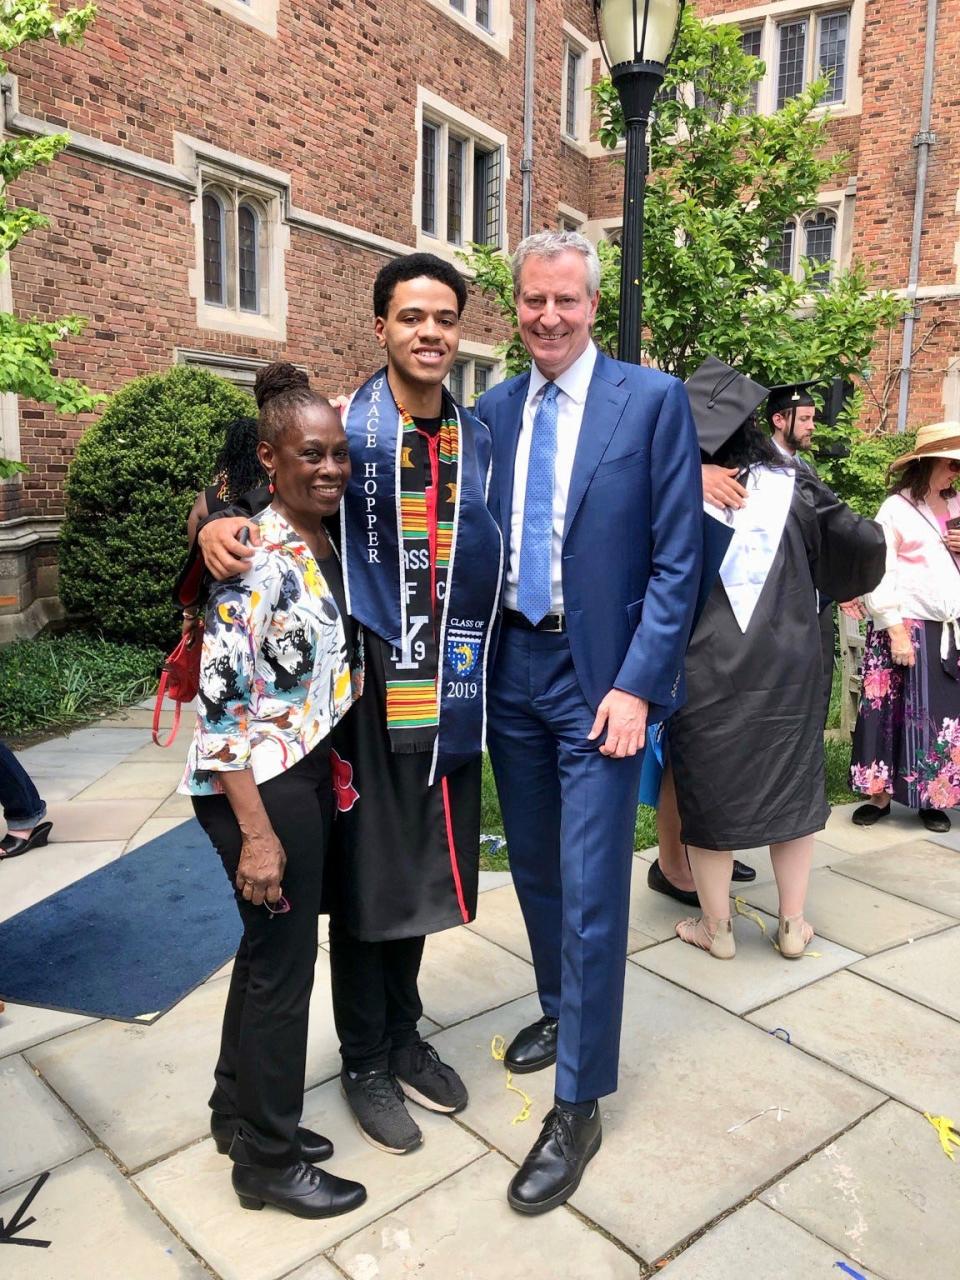 Dante de Blasio with his parents, Bill de Blasio and Chirlane McCray, at Yale University in May 2019.